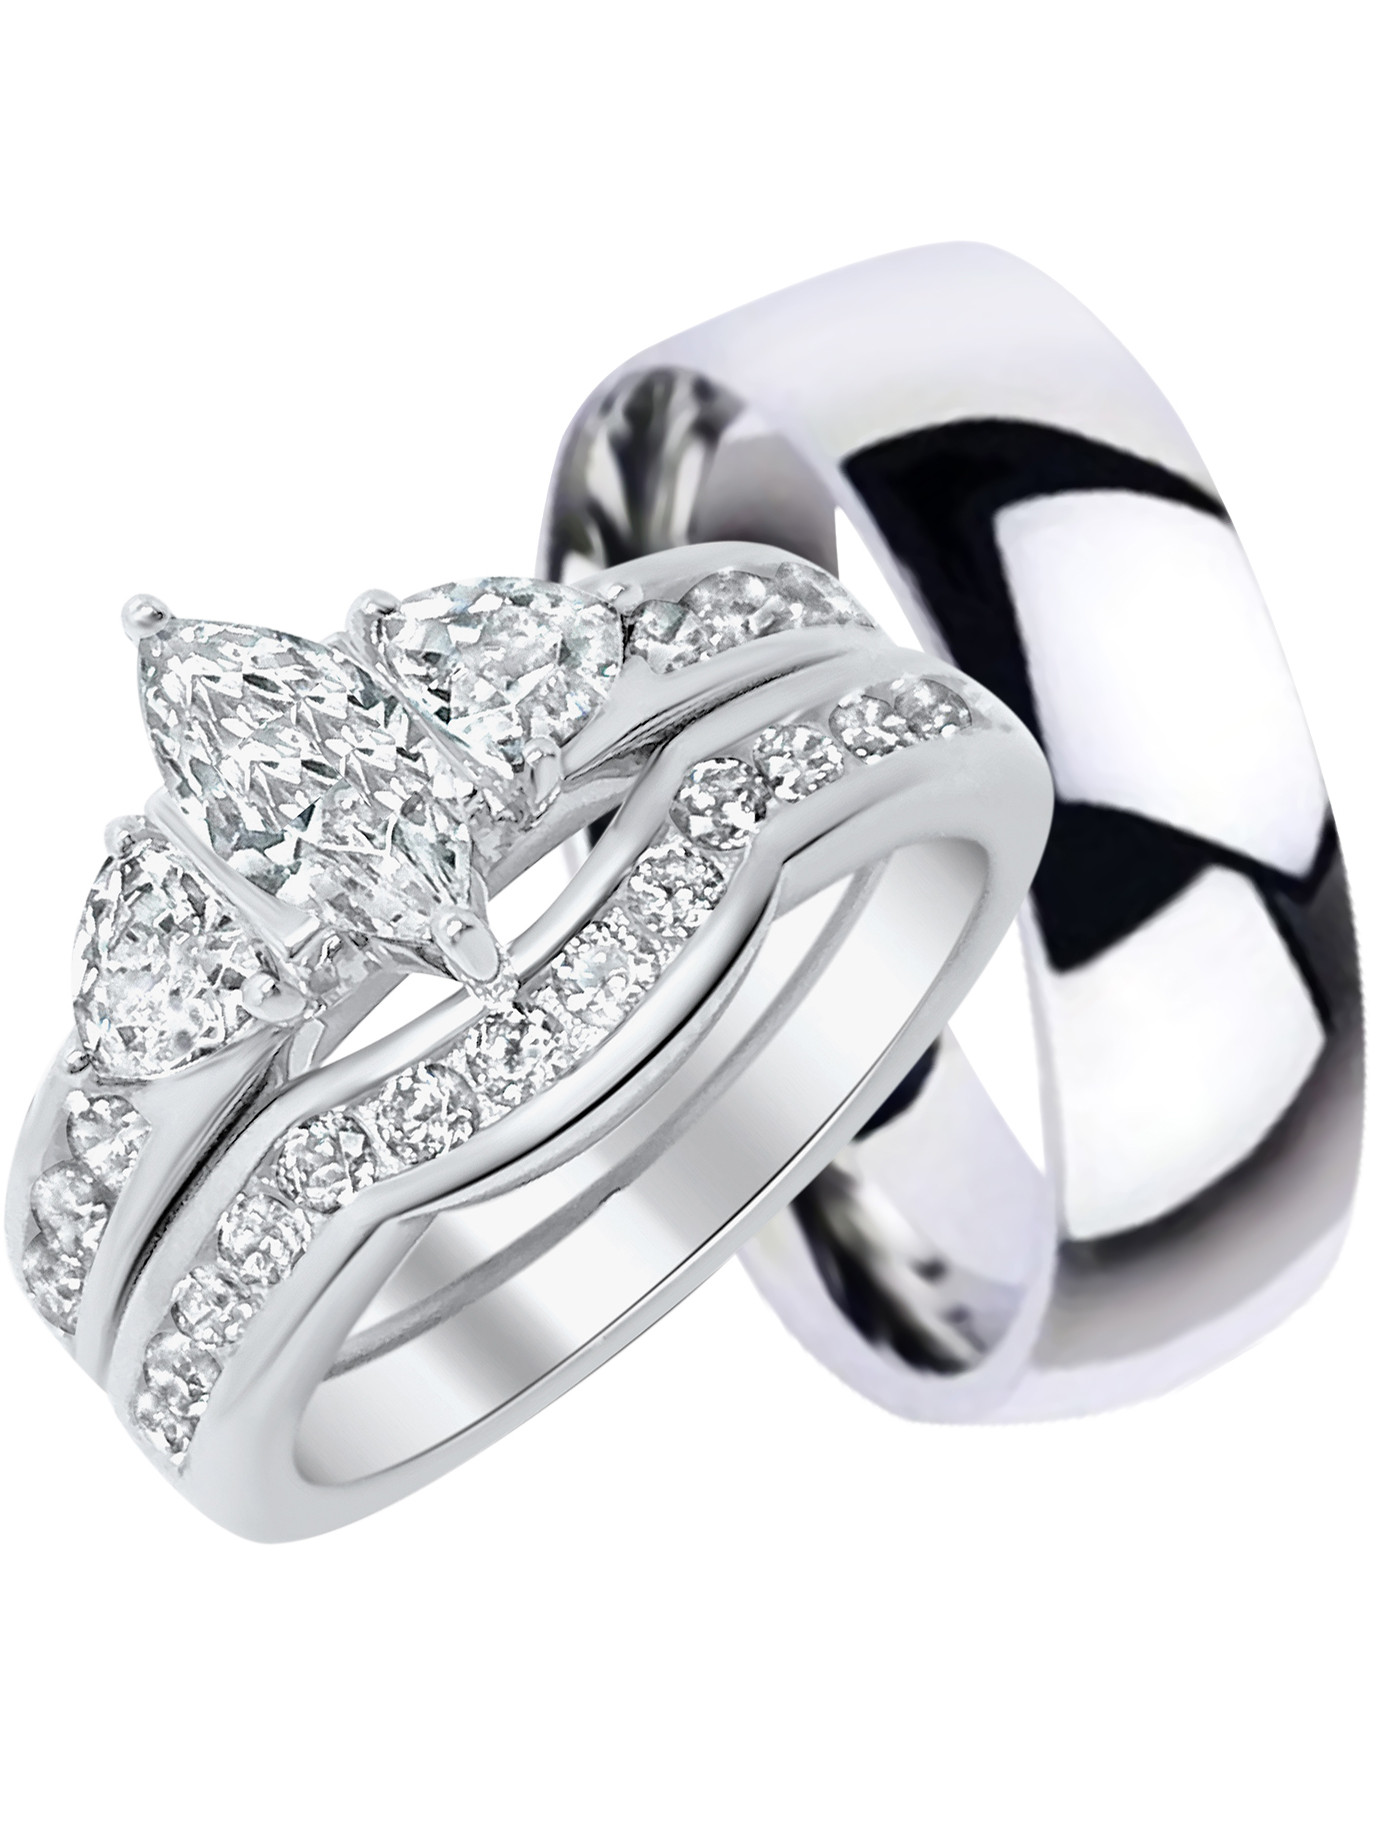 Wedding Ring Sets For Him And Her Walmart
 His and Hers Wedding Ring Set Matching Trio Wedding Bands